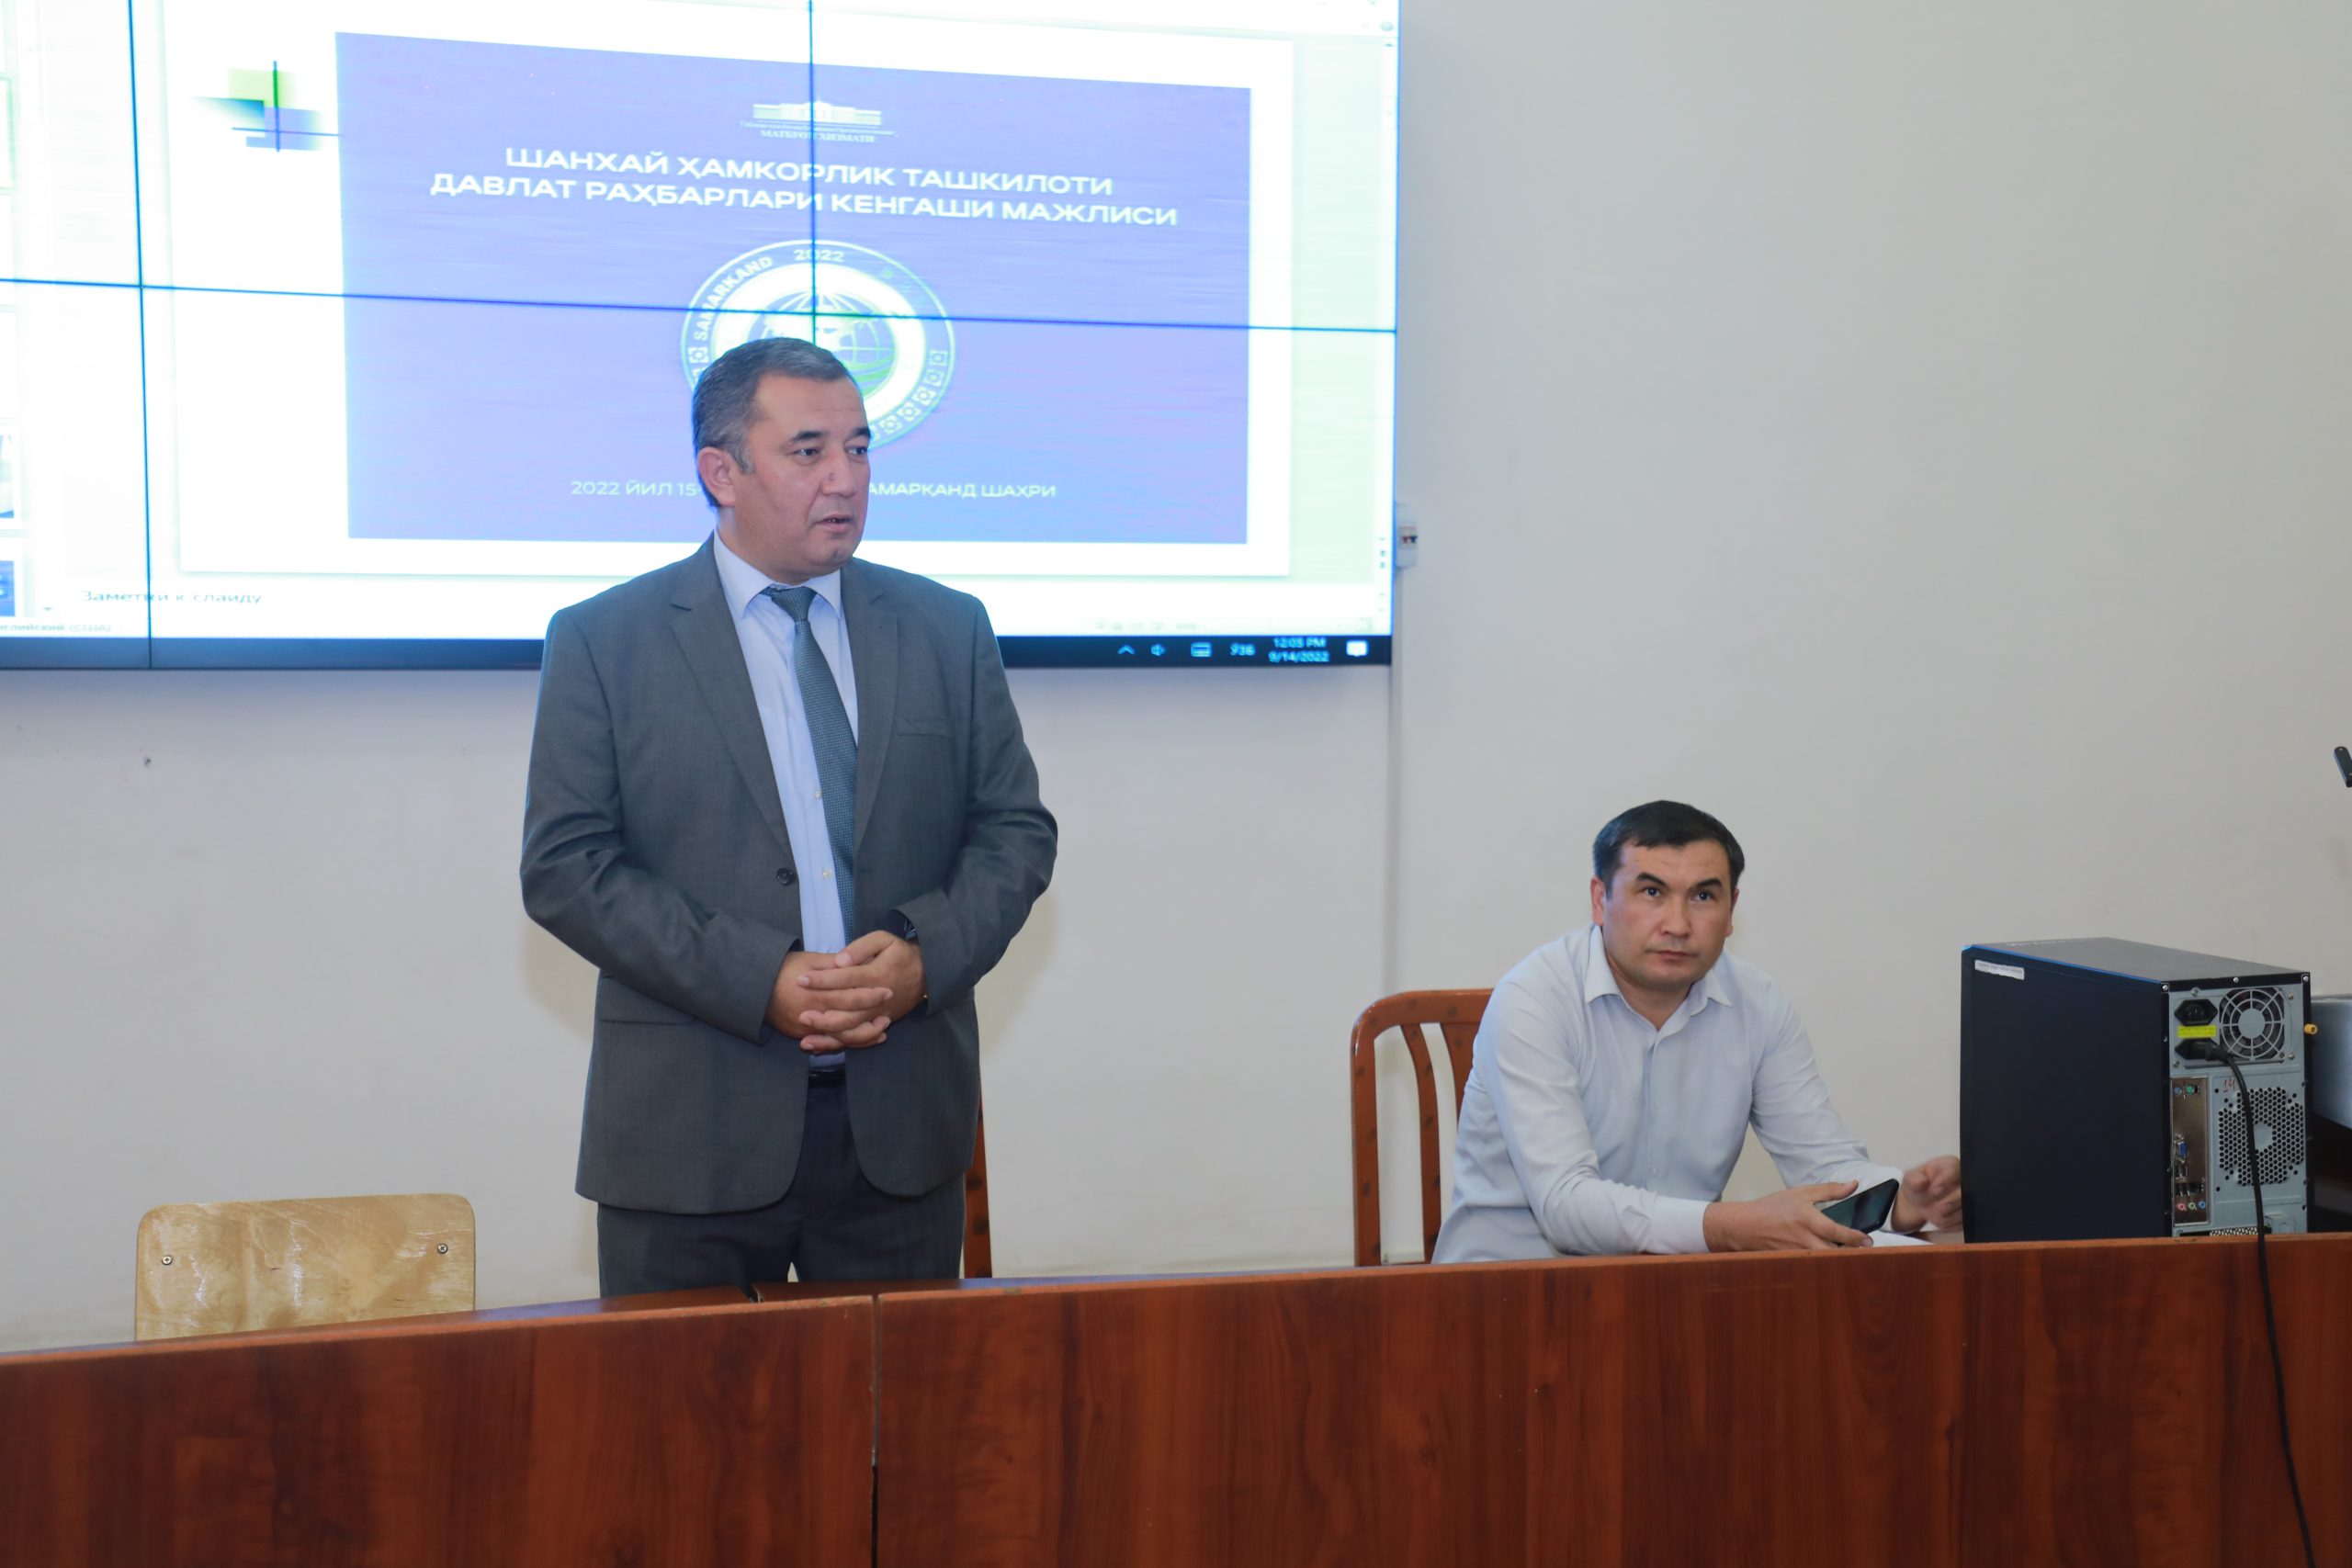 A LECTURE WAS DELIVERED ON THE REPORT OF PRESIDENT SHAVKAT MIRZIYOYEV DEDICATED TO THE SUMMIT